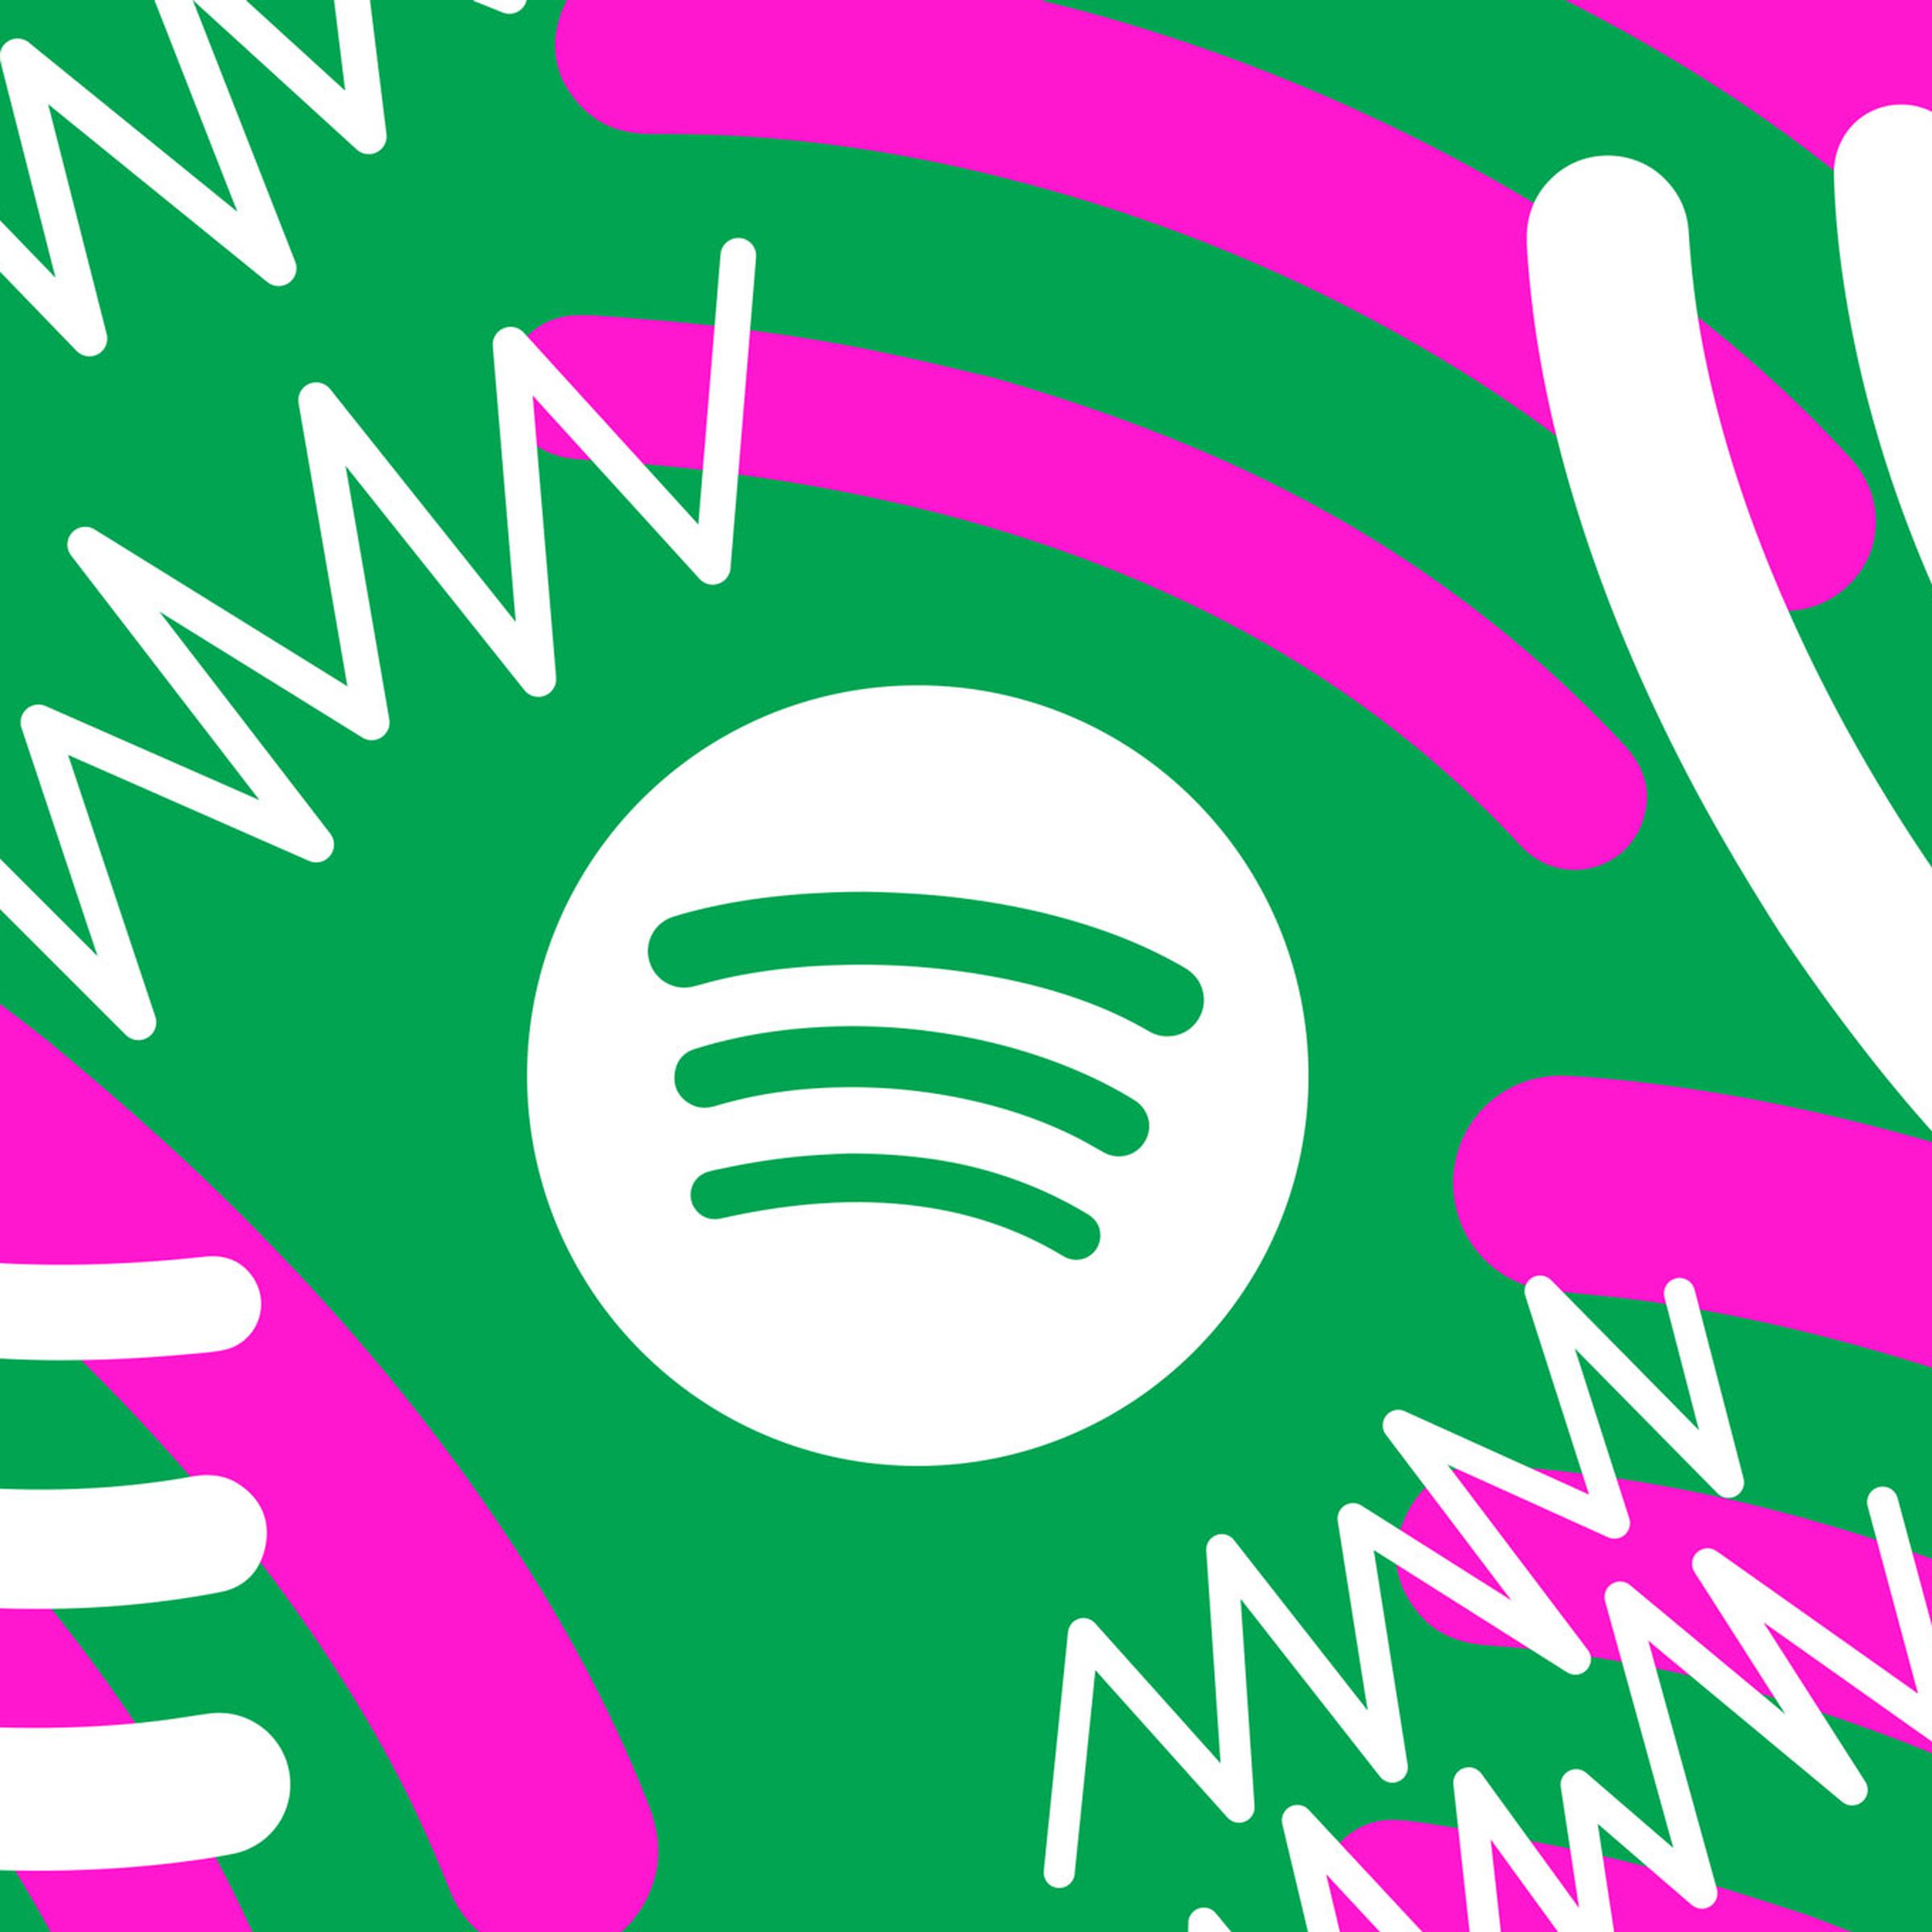 An illustration of the Spotify logo surrounded by noise lines in white, purple, and green.